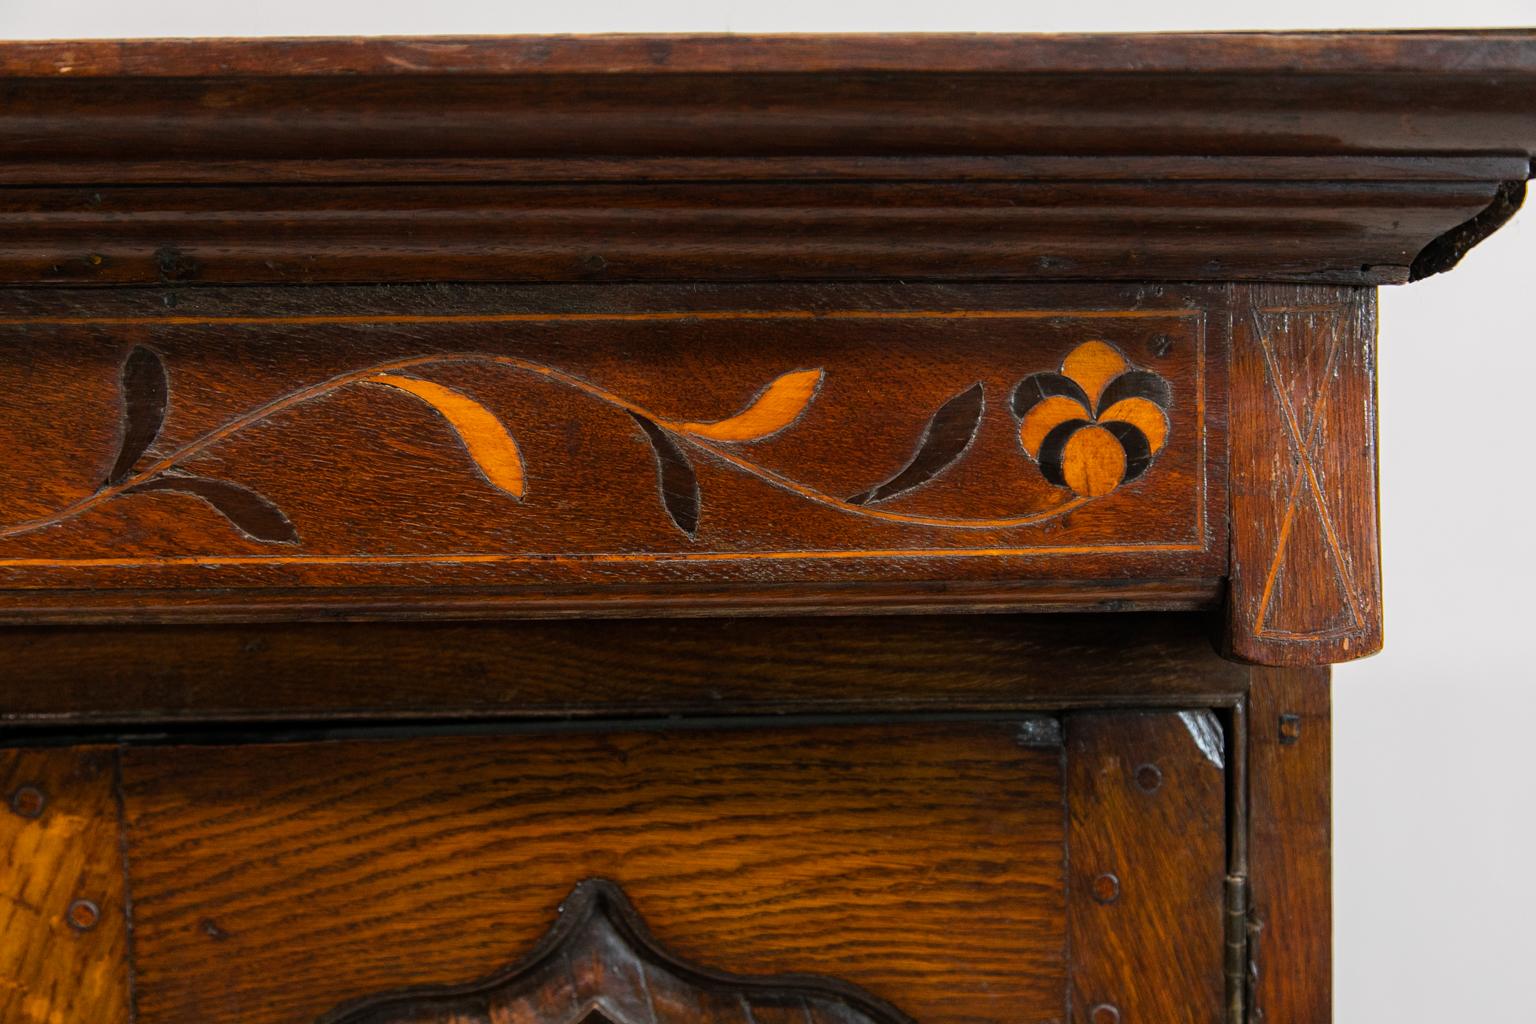 Jacobean inlaid barley twist court cupboard is inlaid with satinwood and ebony arabesques. There is exposed triple peg construction with a carved molded stretcher terminating in bun feet.